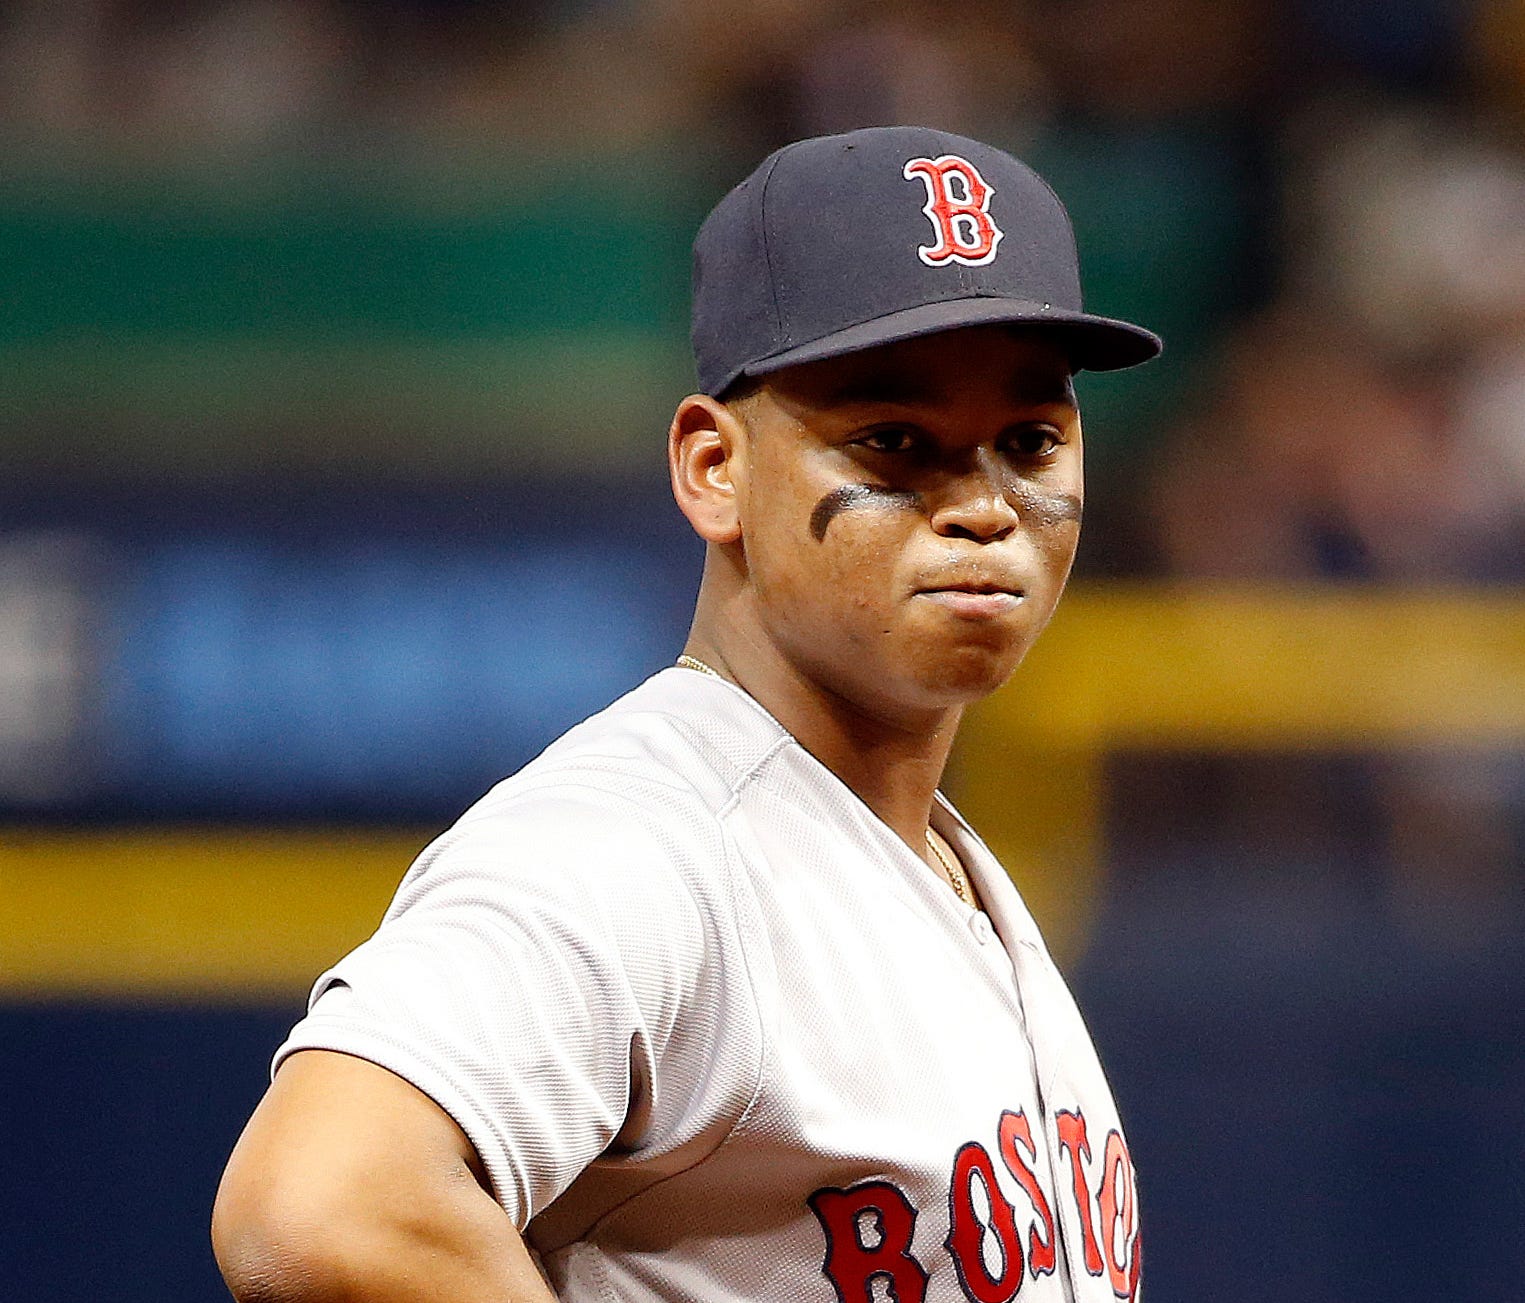 Red Sox third baseman Rafael Devers is batting .350 since his callup from the minors.